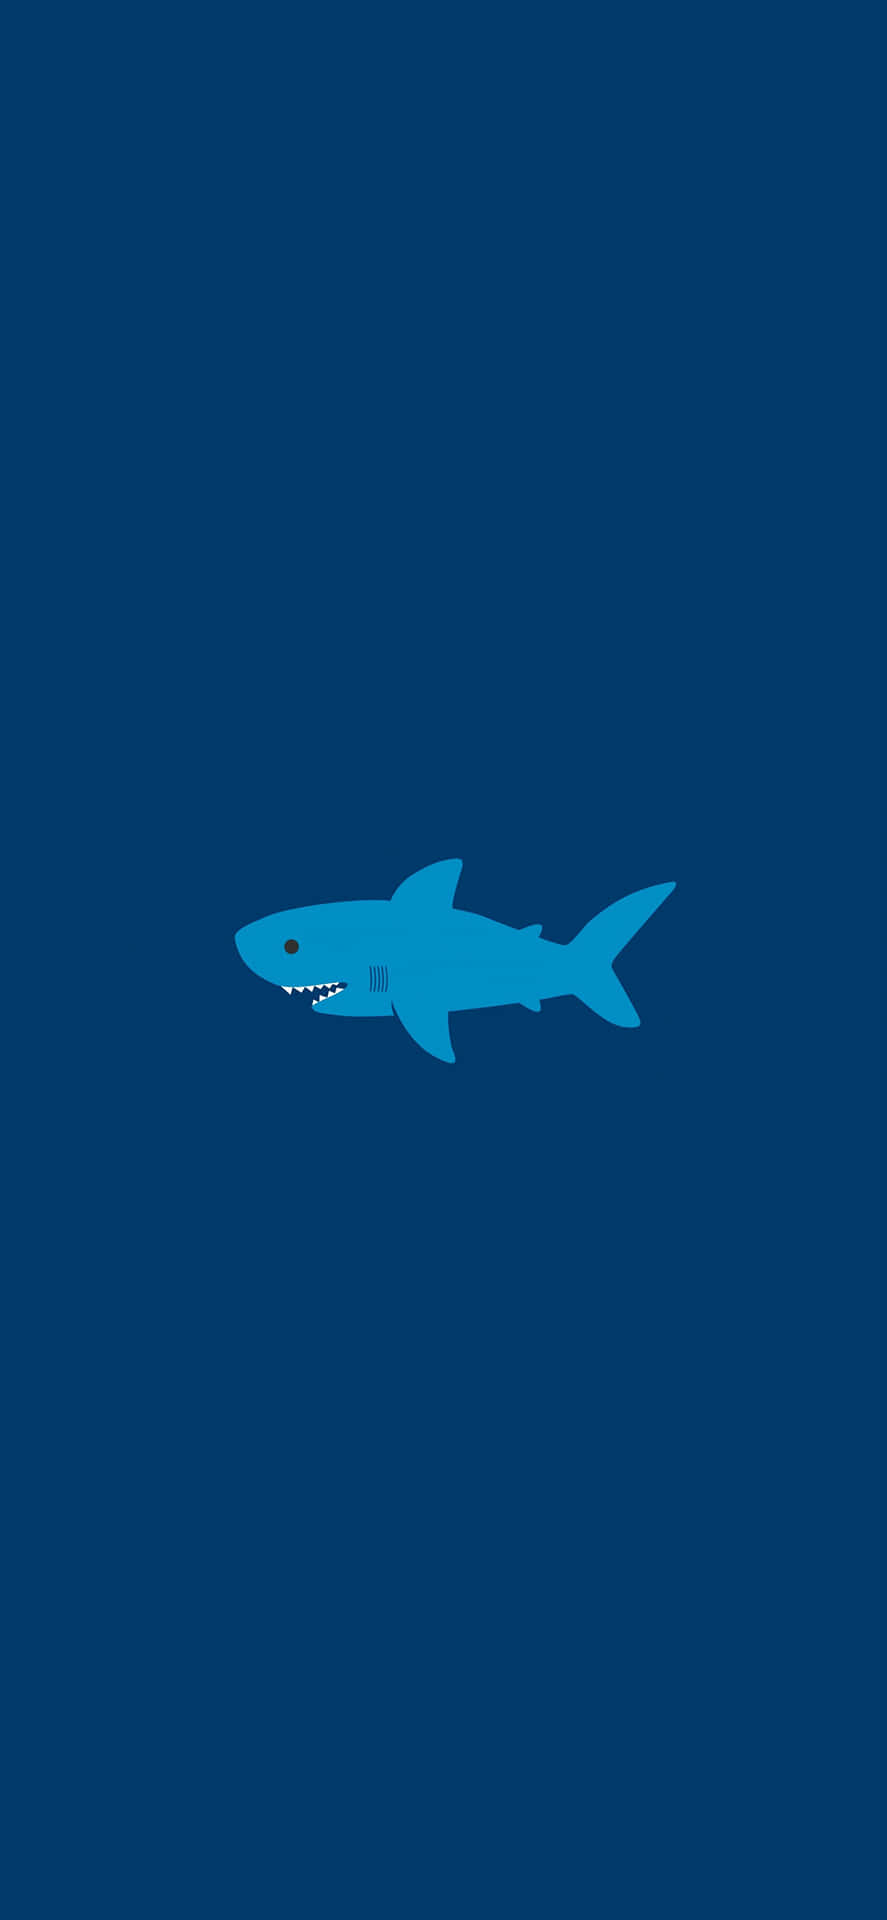 Show your style and stand out with this awesome Shark iPhone! Wallpaper